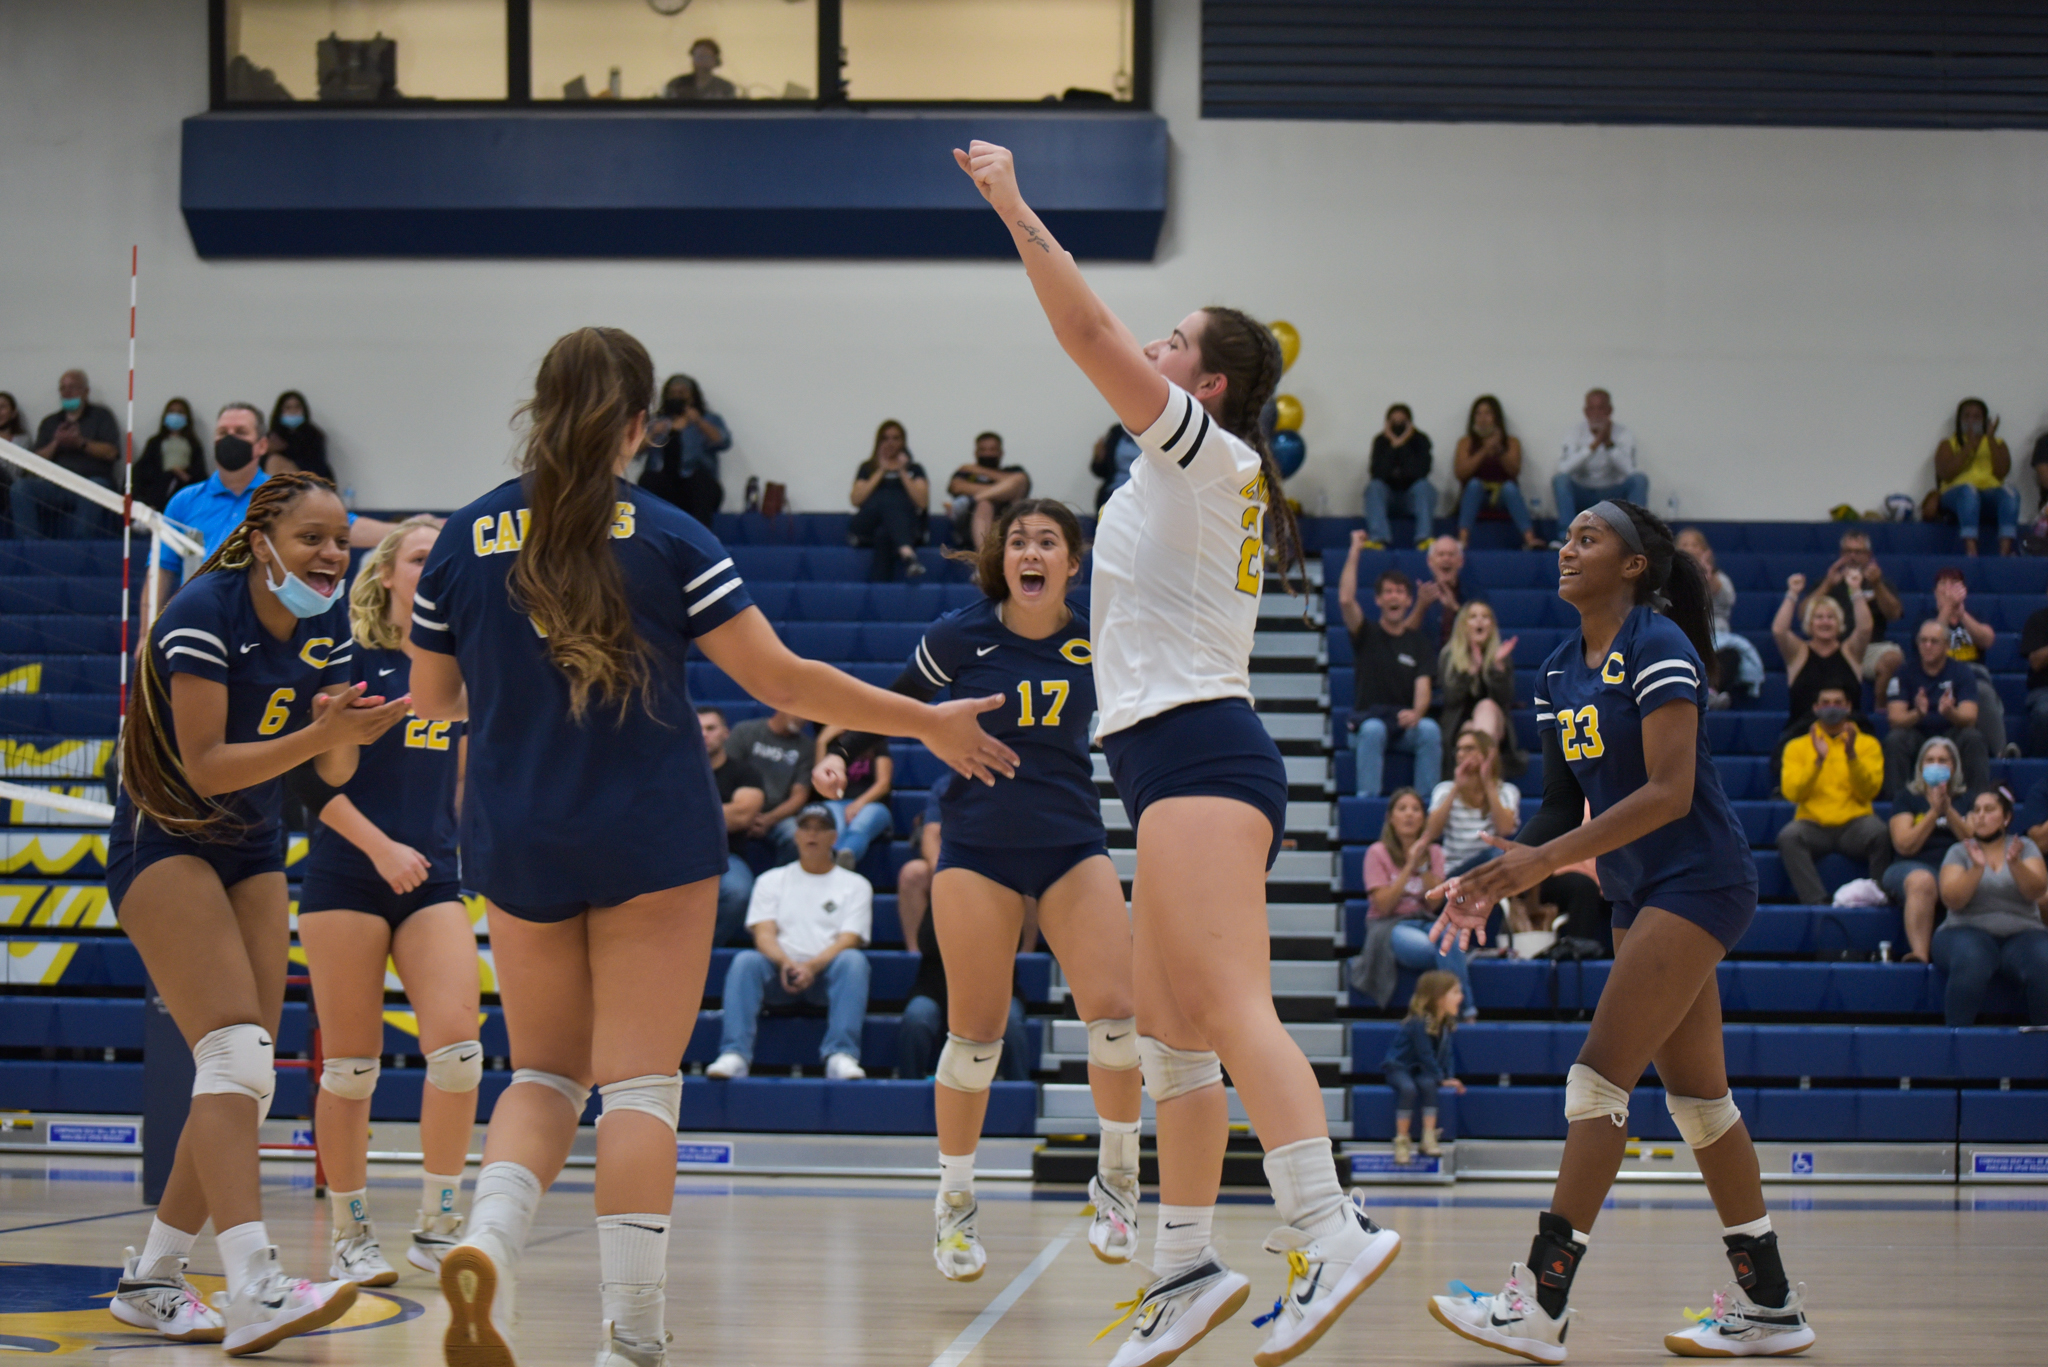 College of the Canyons (13-10, 10-2) has won seven straight matches, and 11 of its final 13, down the stretch after a 3-2 victory over No. 16 Ventura College on Tuesday night. The Cougars will now await playoff seeding with a chance to qualify for the postseason for an eighth straight year. —Mari Kneisel/COC Sports Information